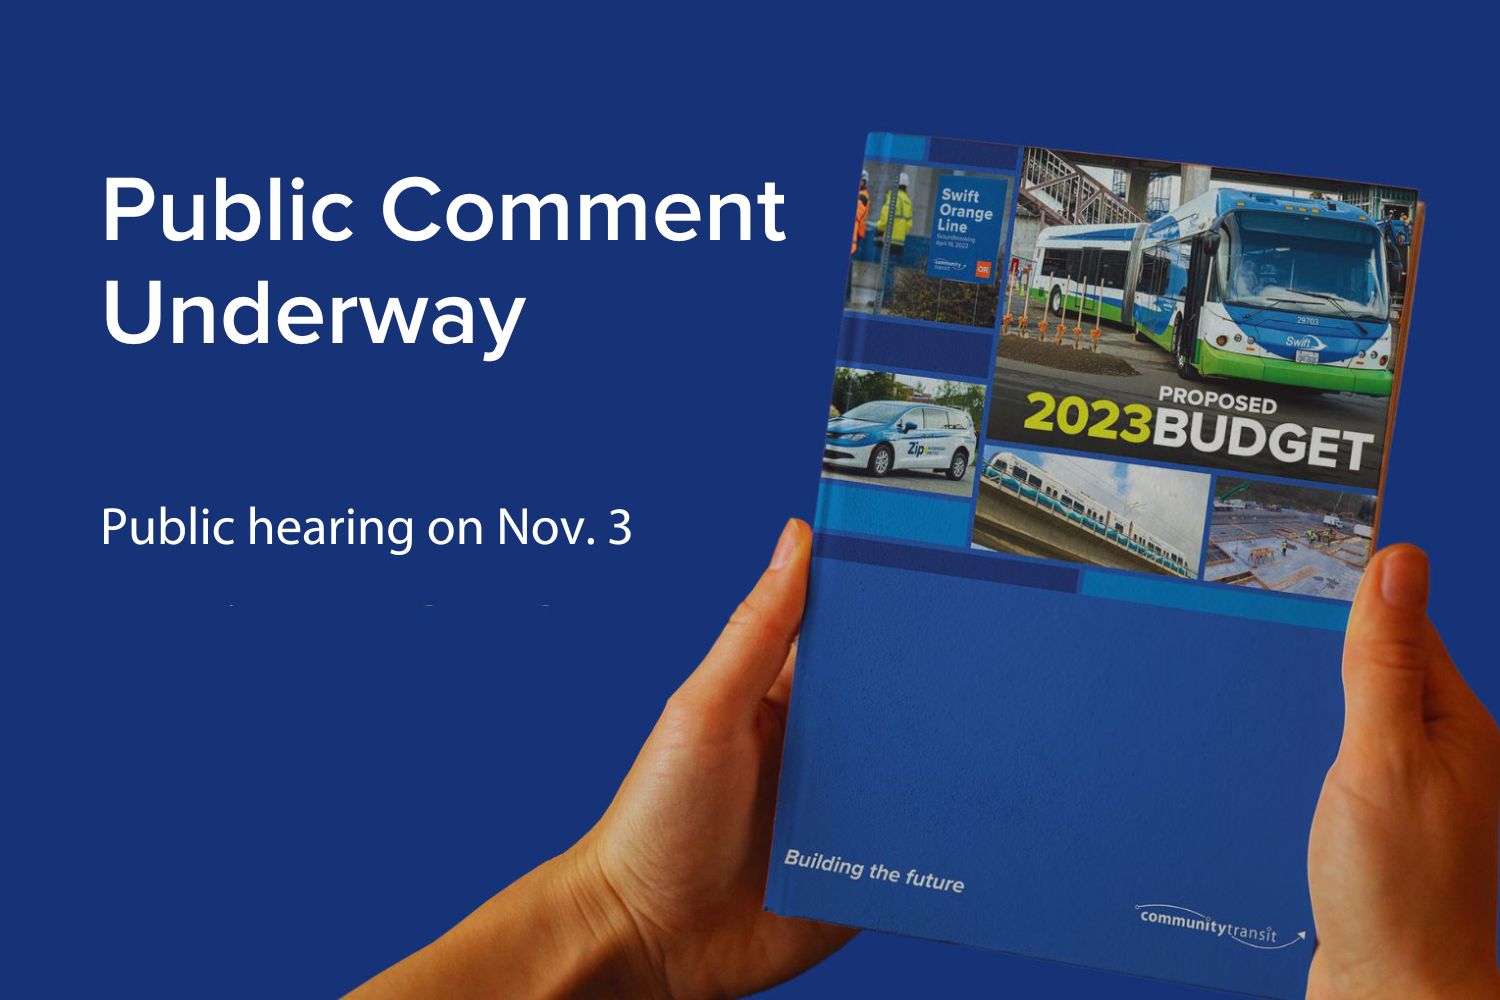 Hands hold a copy of the Proposed 2023 Budget document, open to public comment through Nov. 3